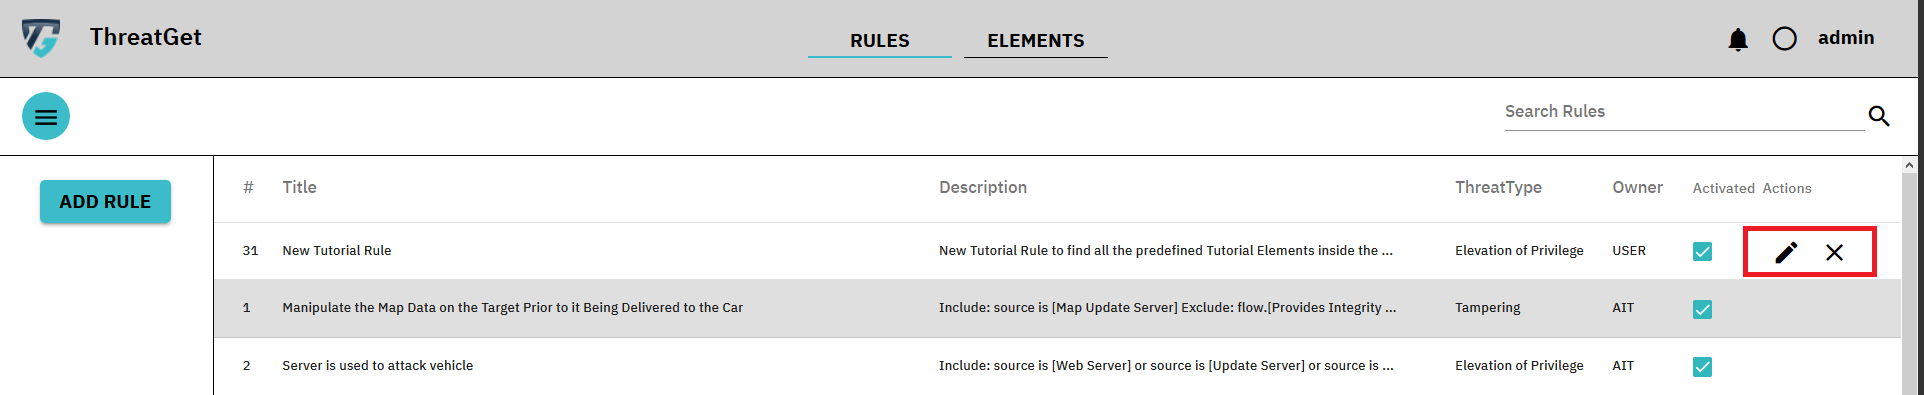 Rules overview screen new rule added